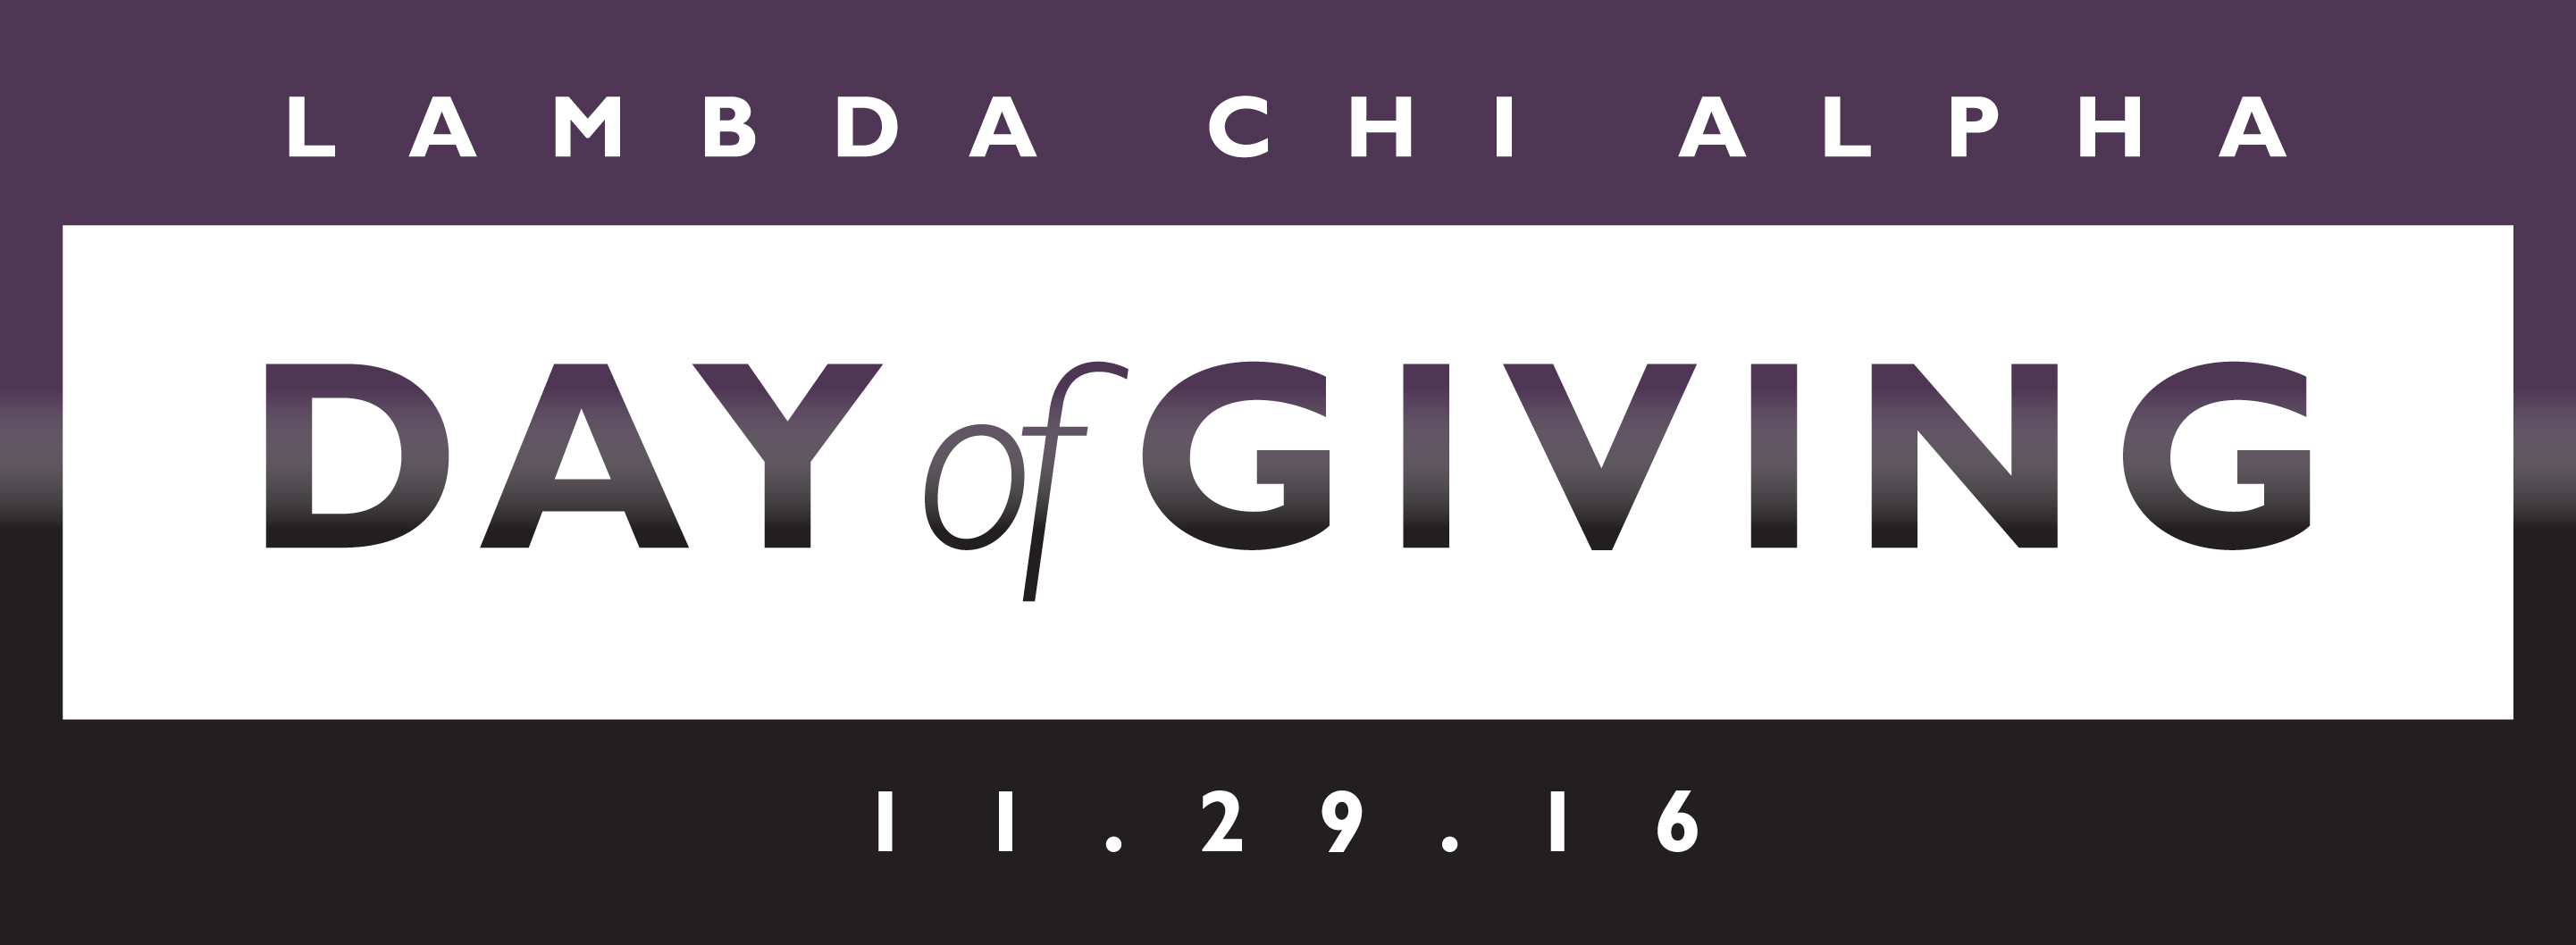 day-of-giving-logo